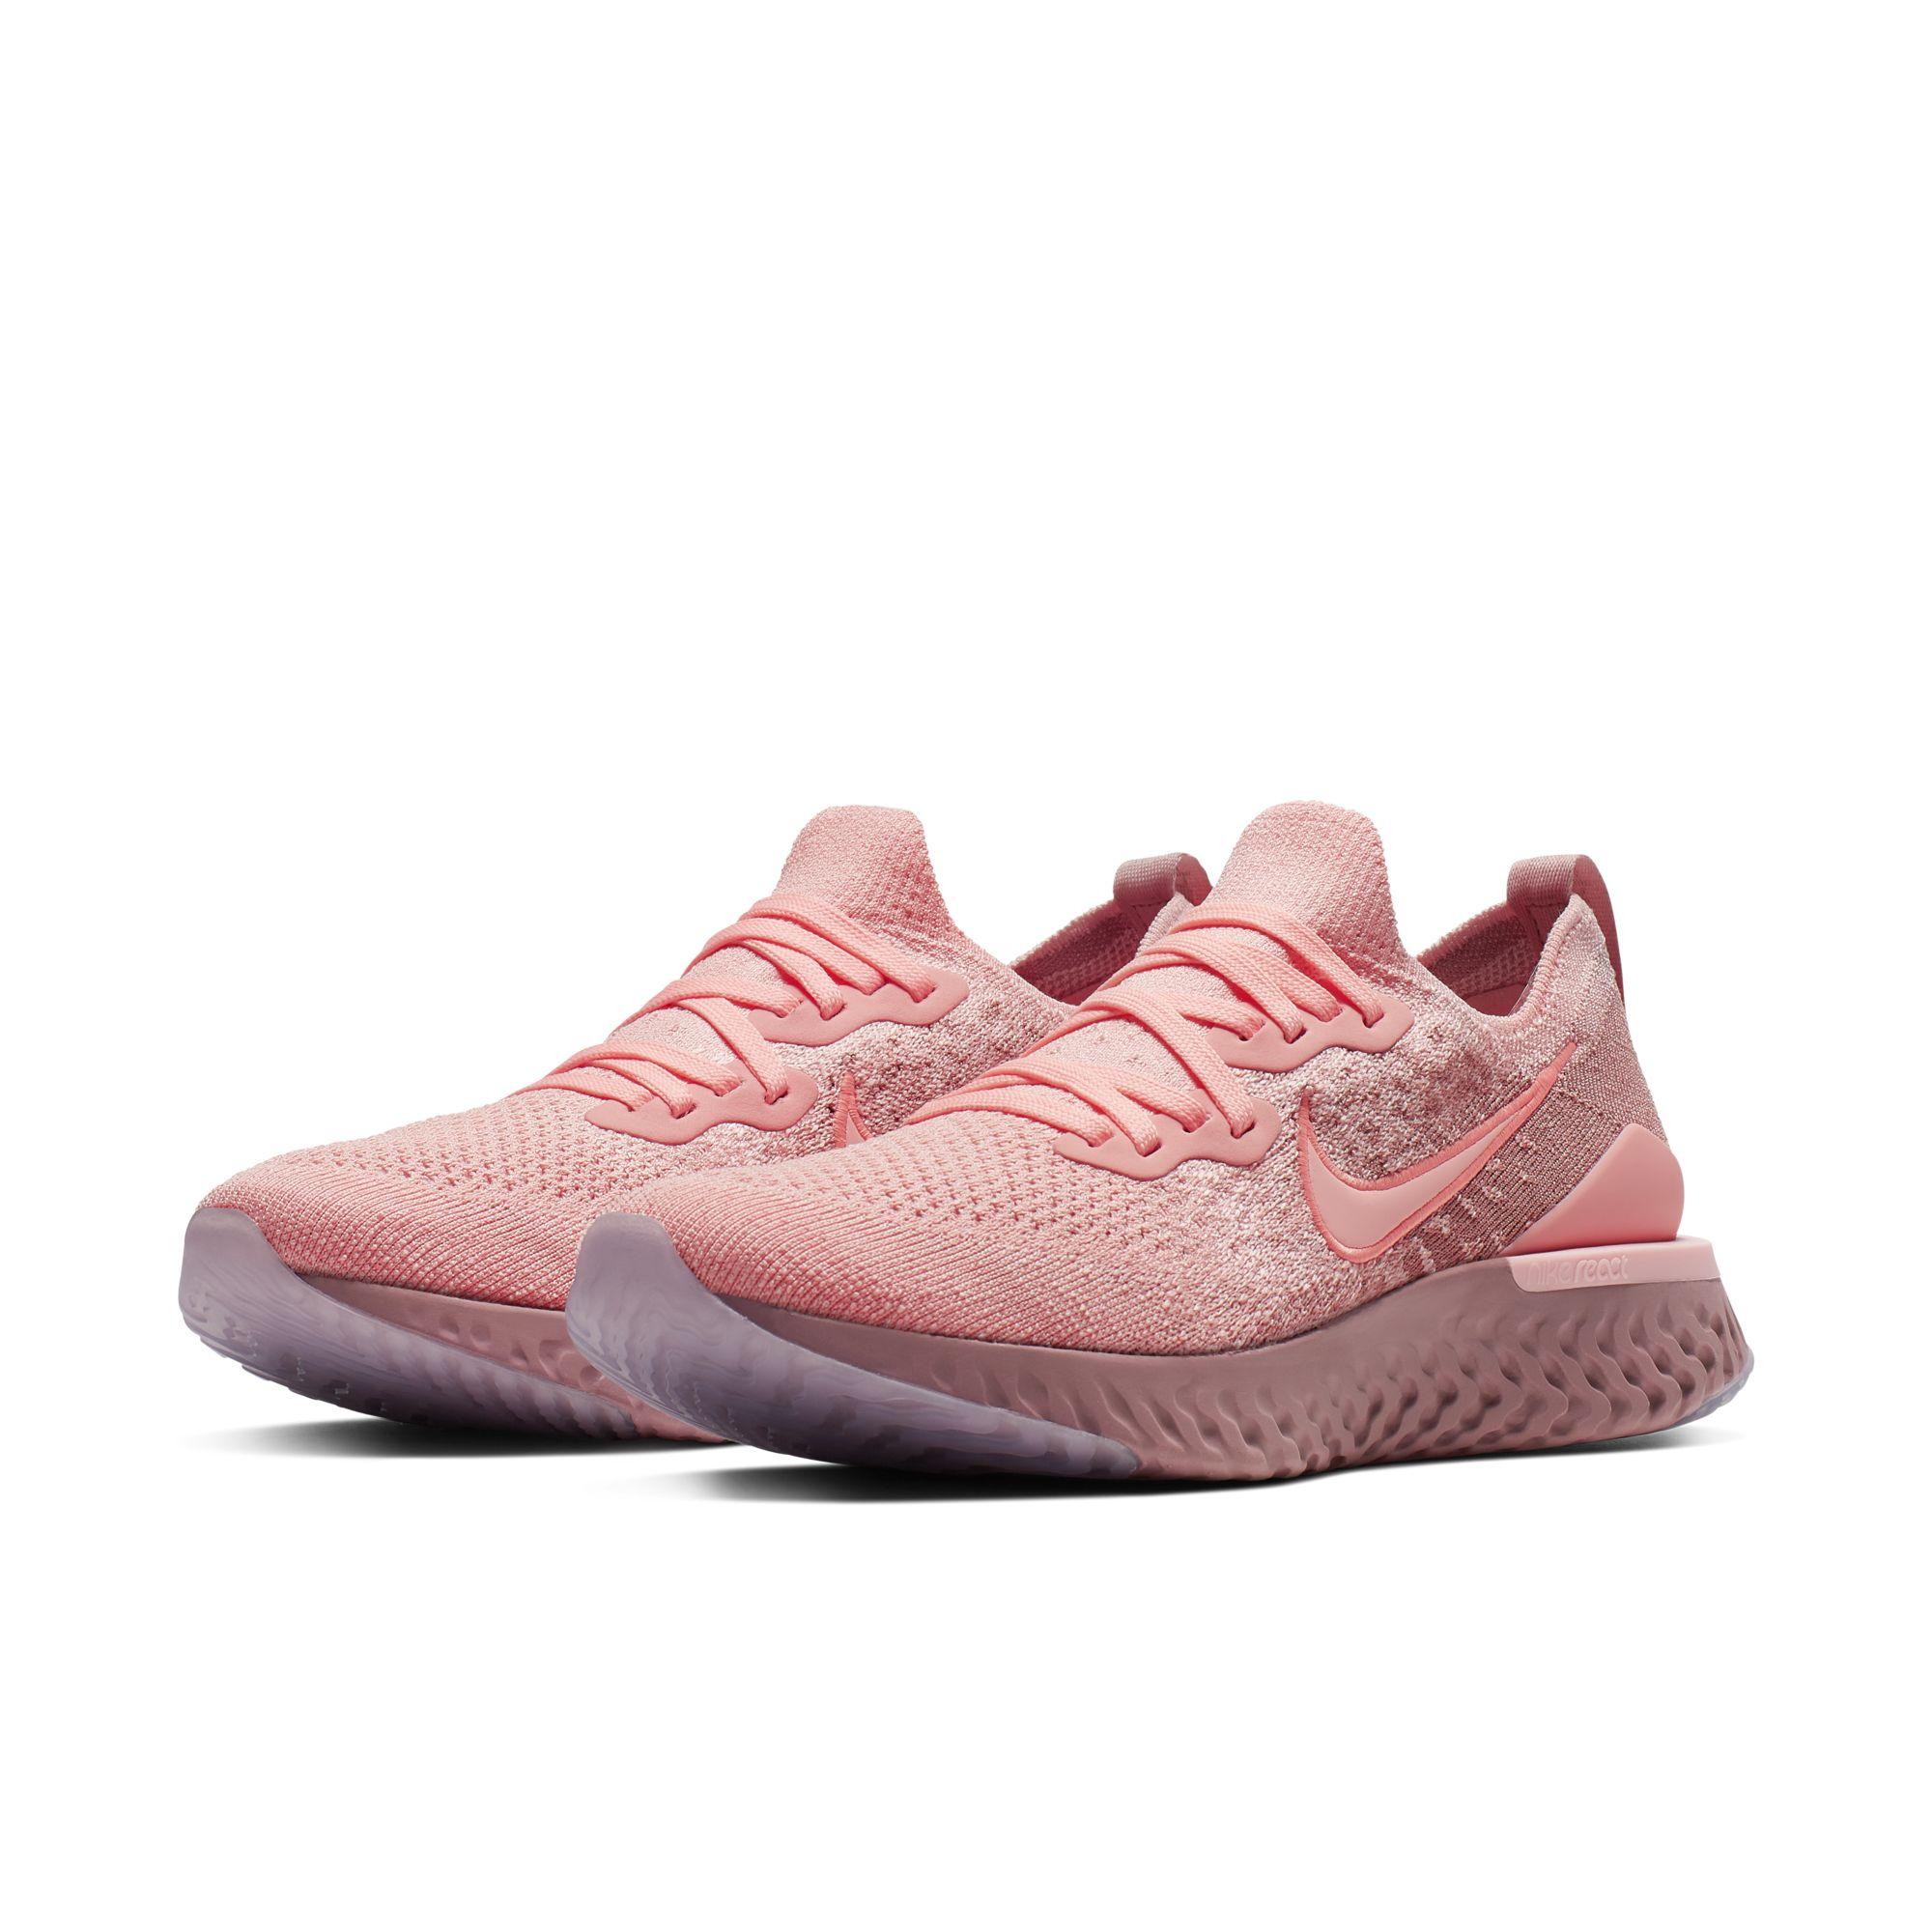 Nike Rubber Epic React Flyknit 2 Running Shoe in Pink - Save 48% | Lyst UK